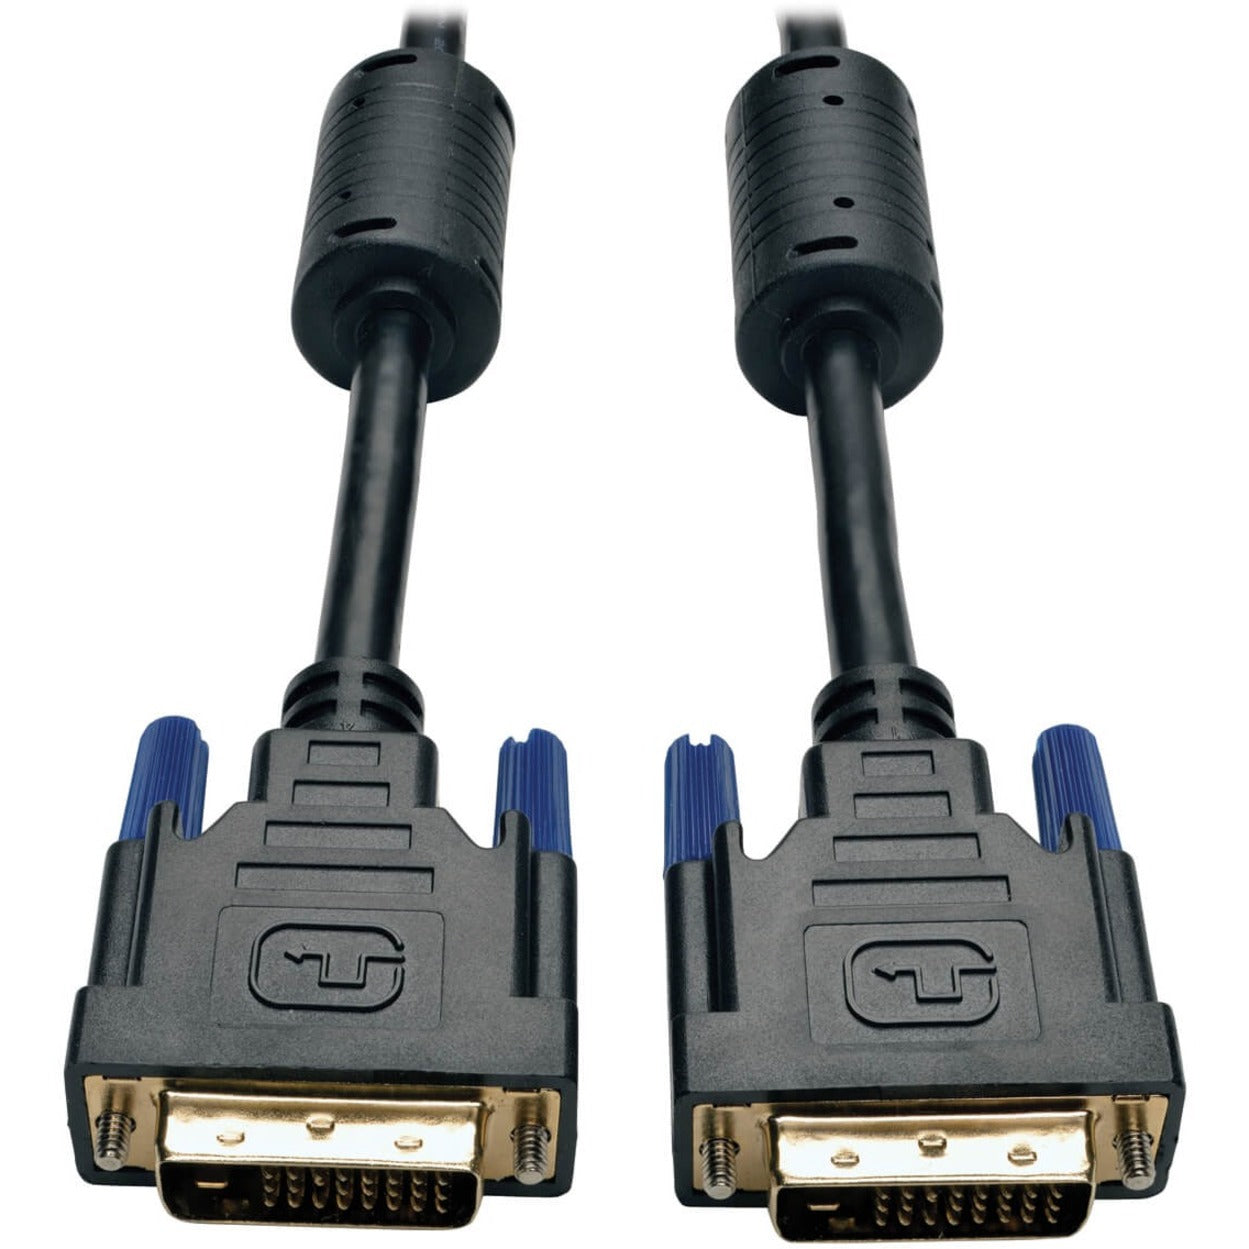 Tripp Lite P560-010 DVI Cable, 10 ft, Dual Link, Male to Male